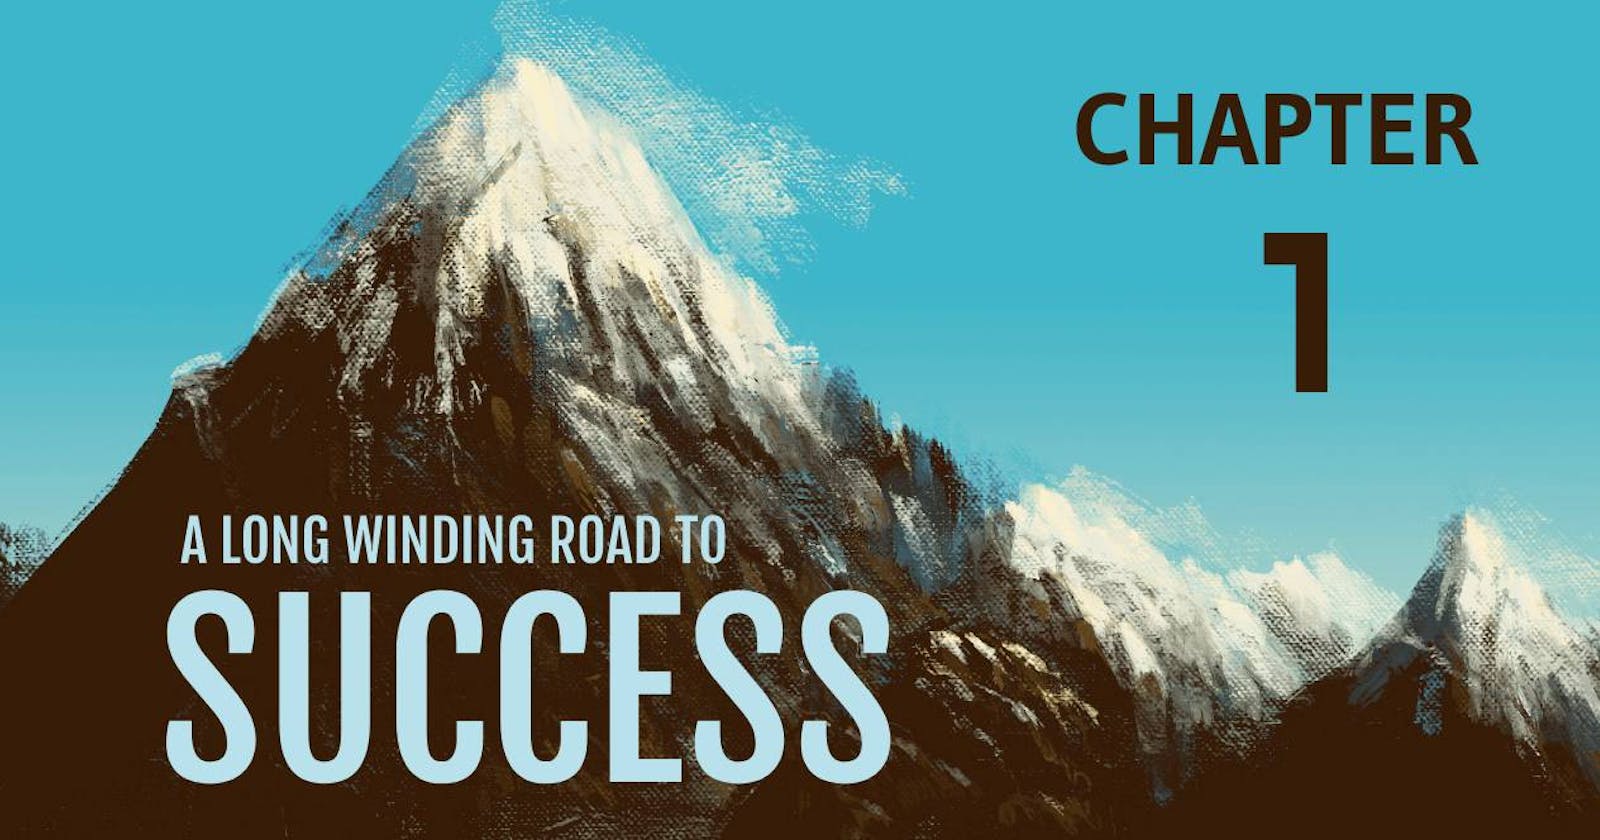 A long winding road to success - Chapter 1